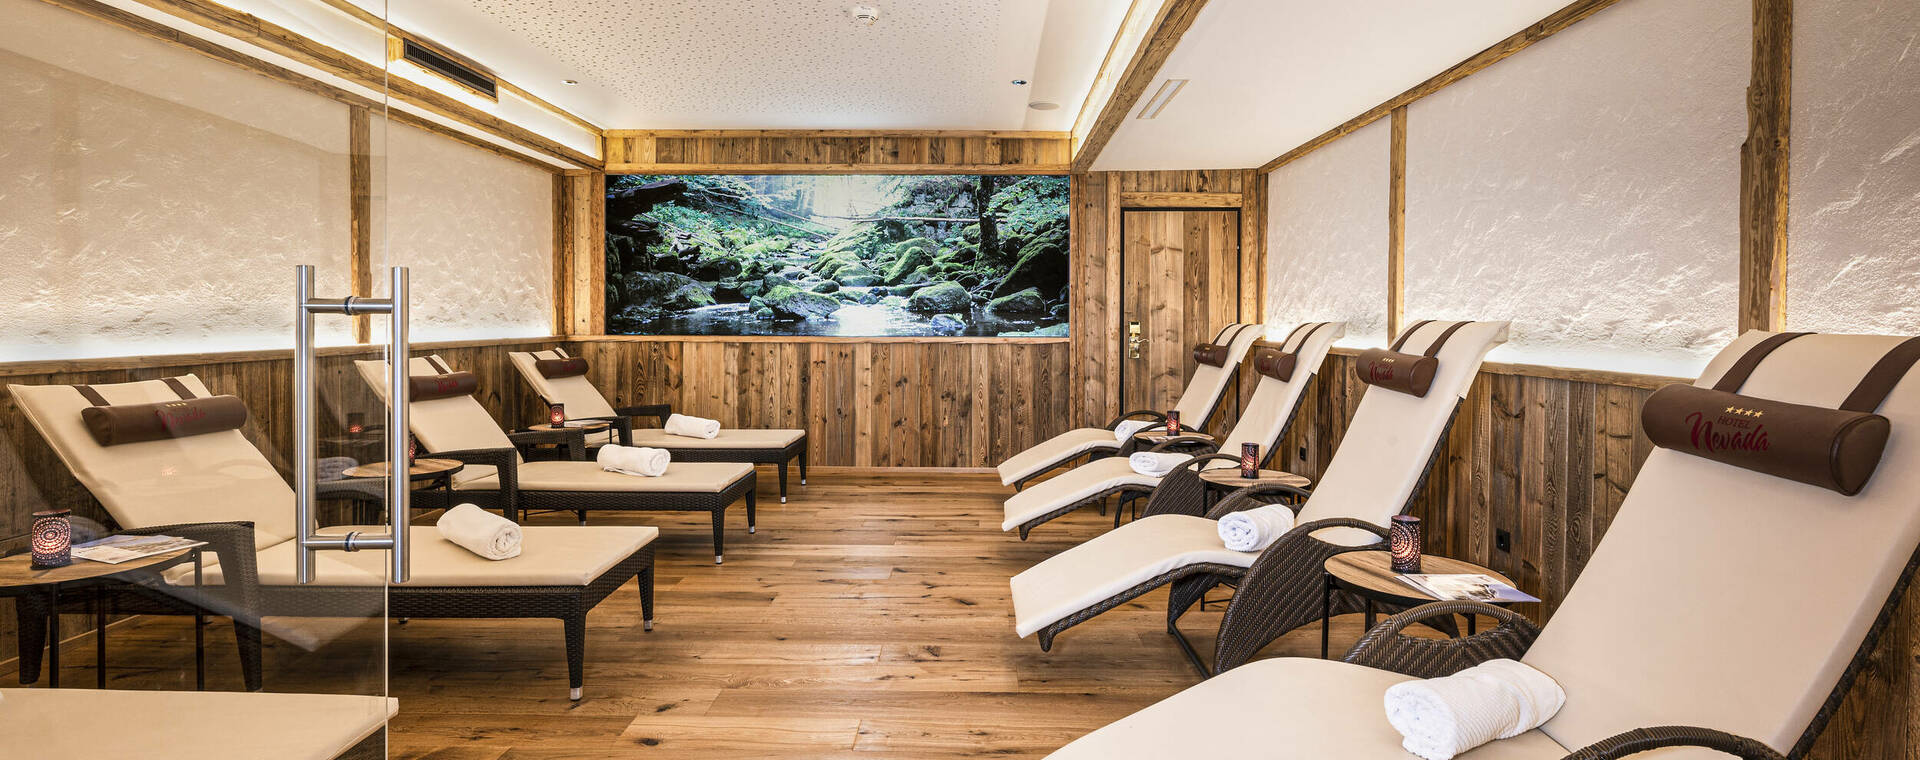  Relaxation zone in the wellness area of Hotel Nevada